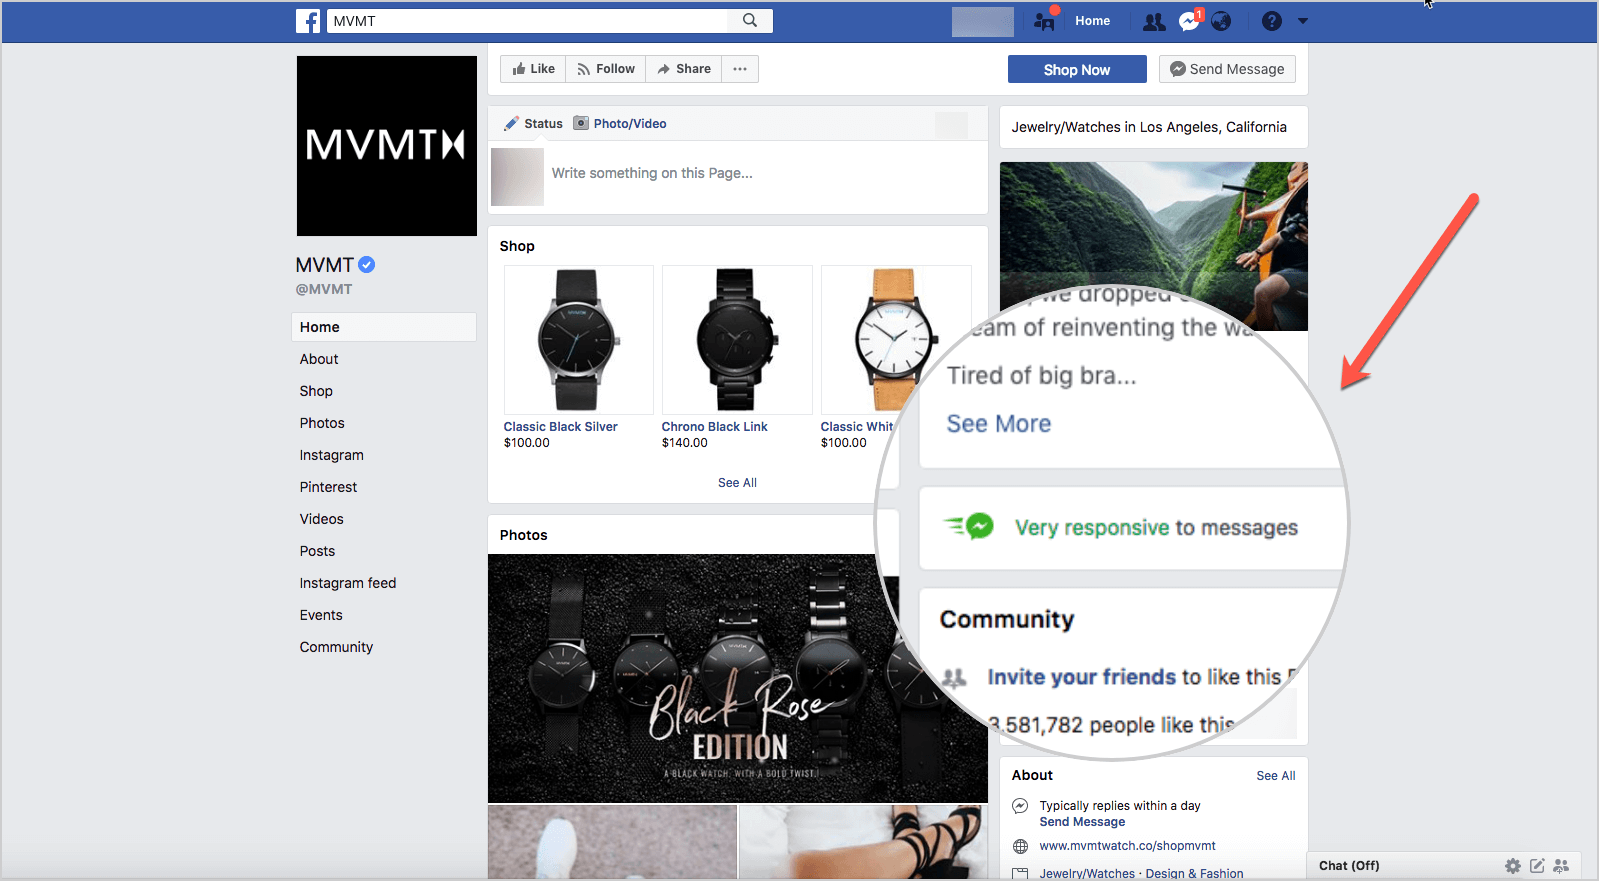 Facebook ads for eCommerce: Make sure you're responsive